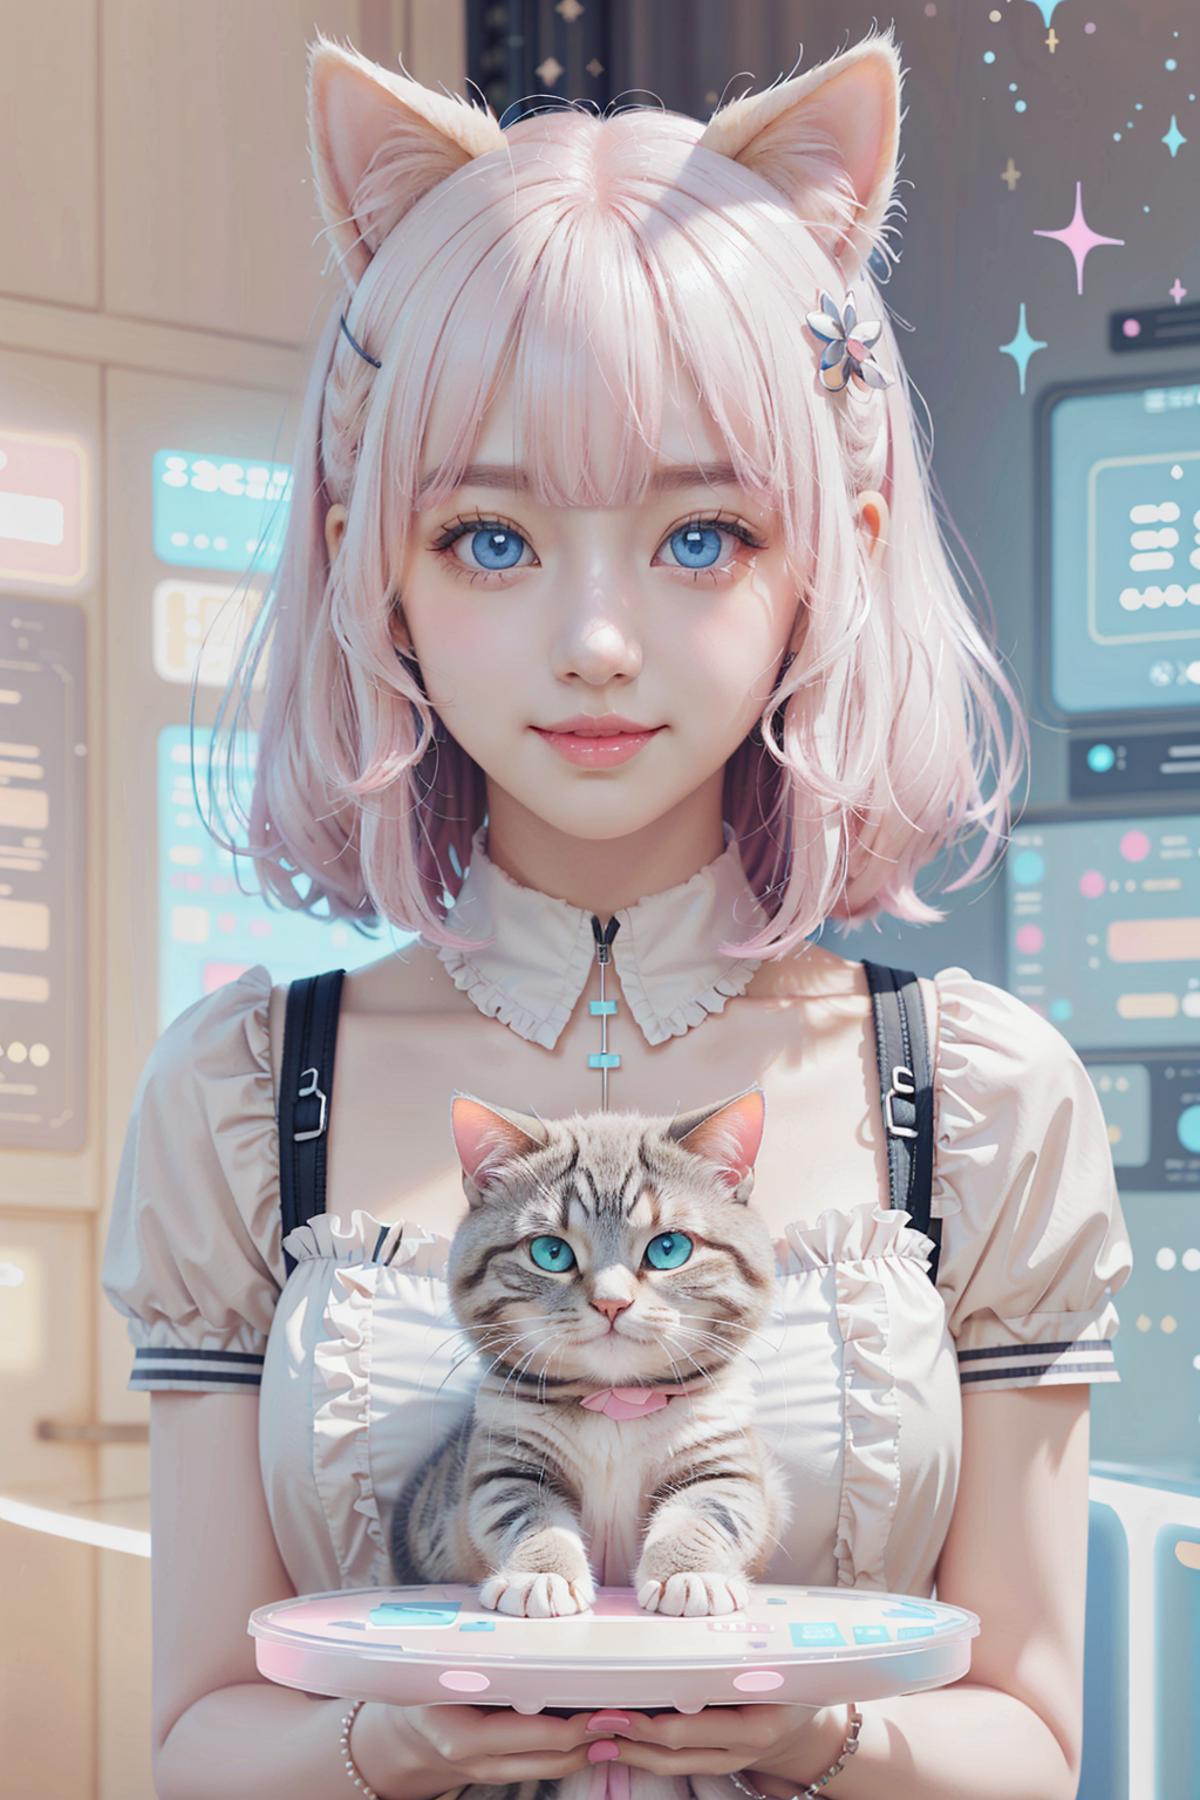 Cartoon Anime Girl with Blue Eyes and Pink Hair Holding a Cat.